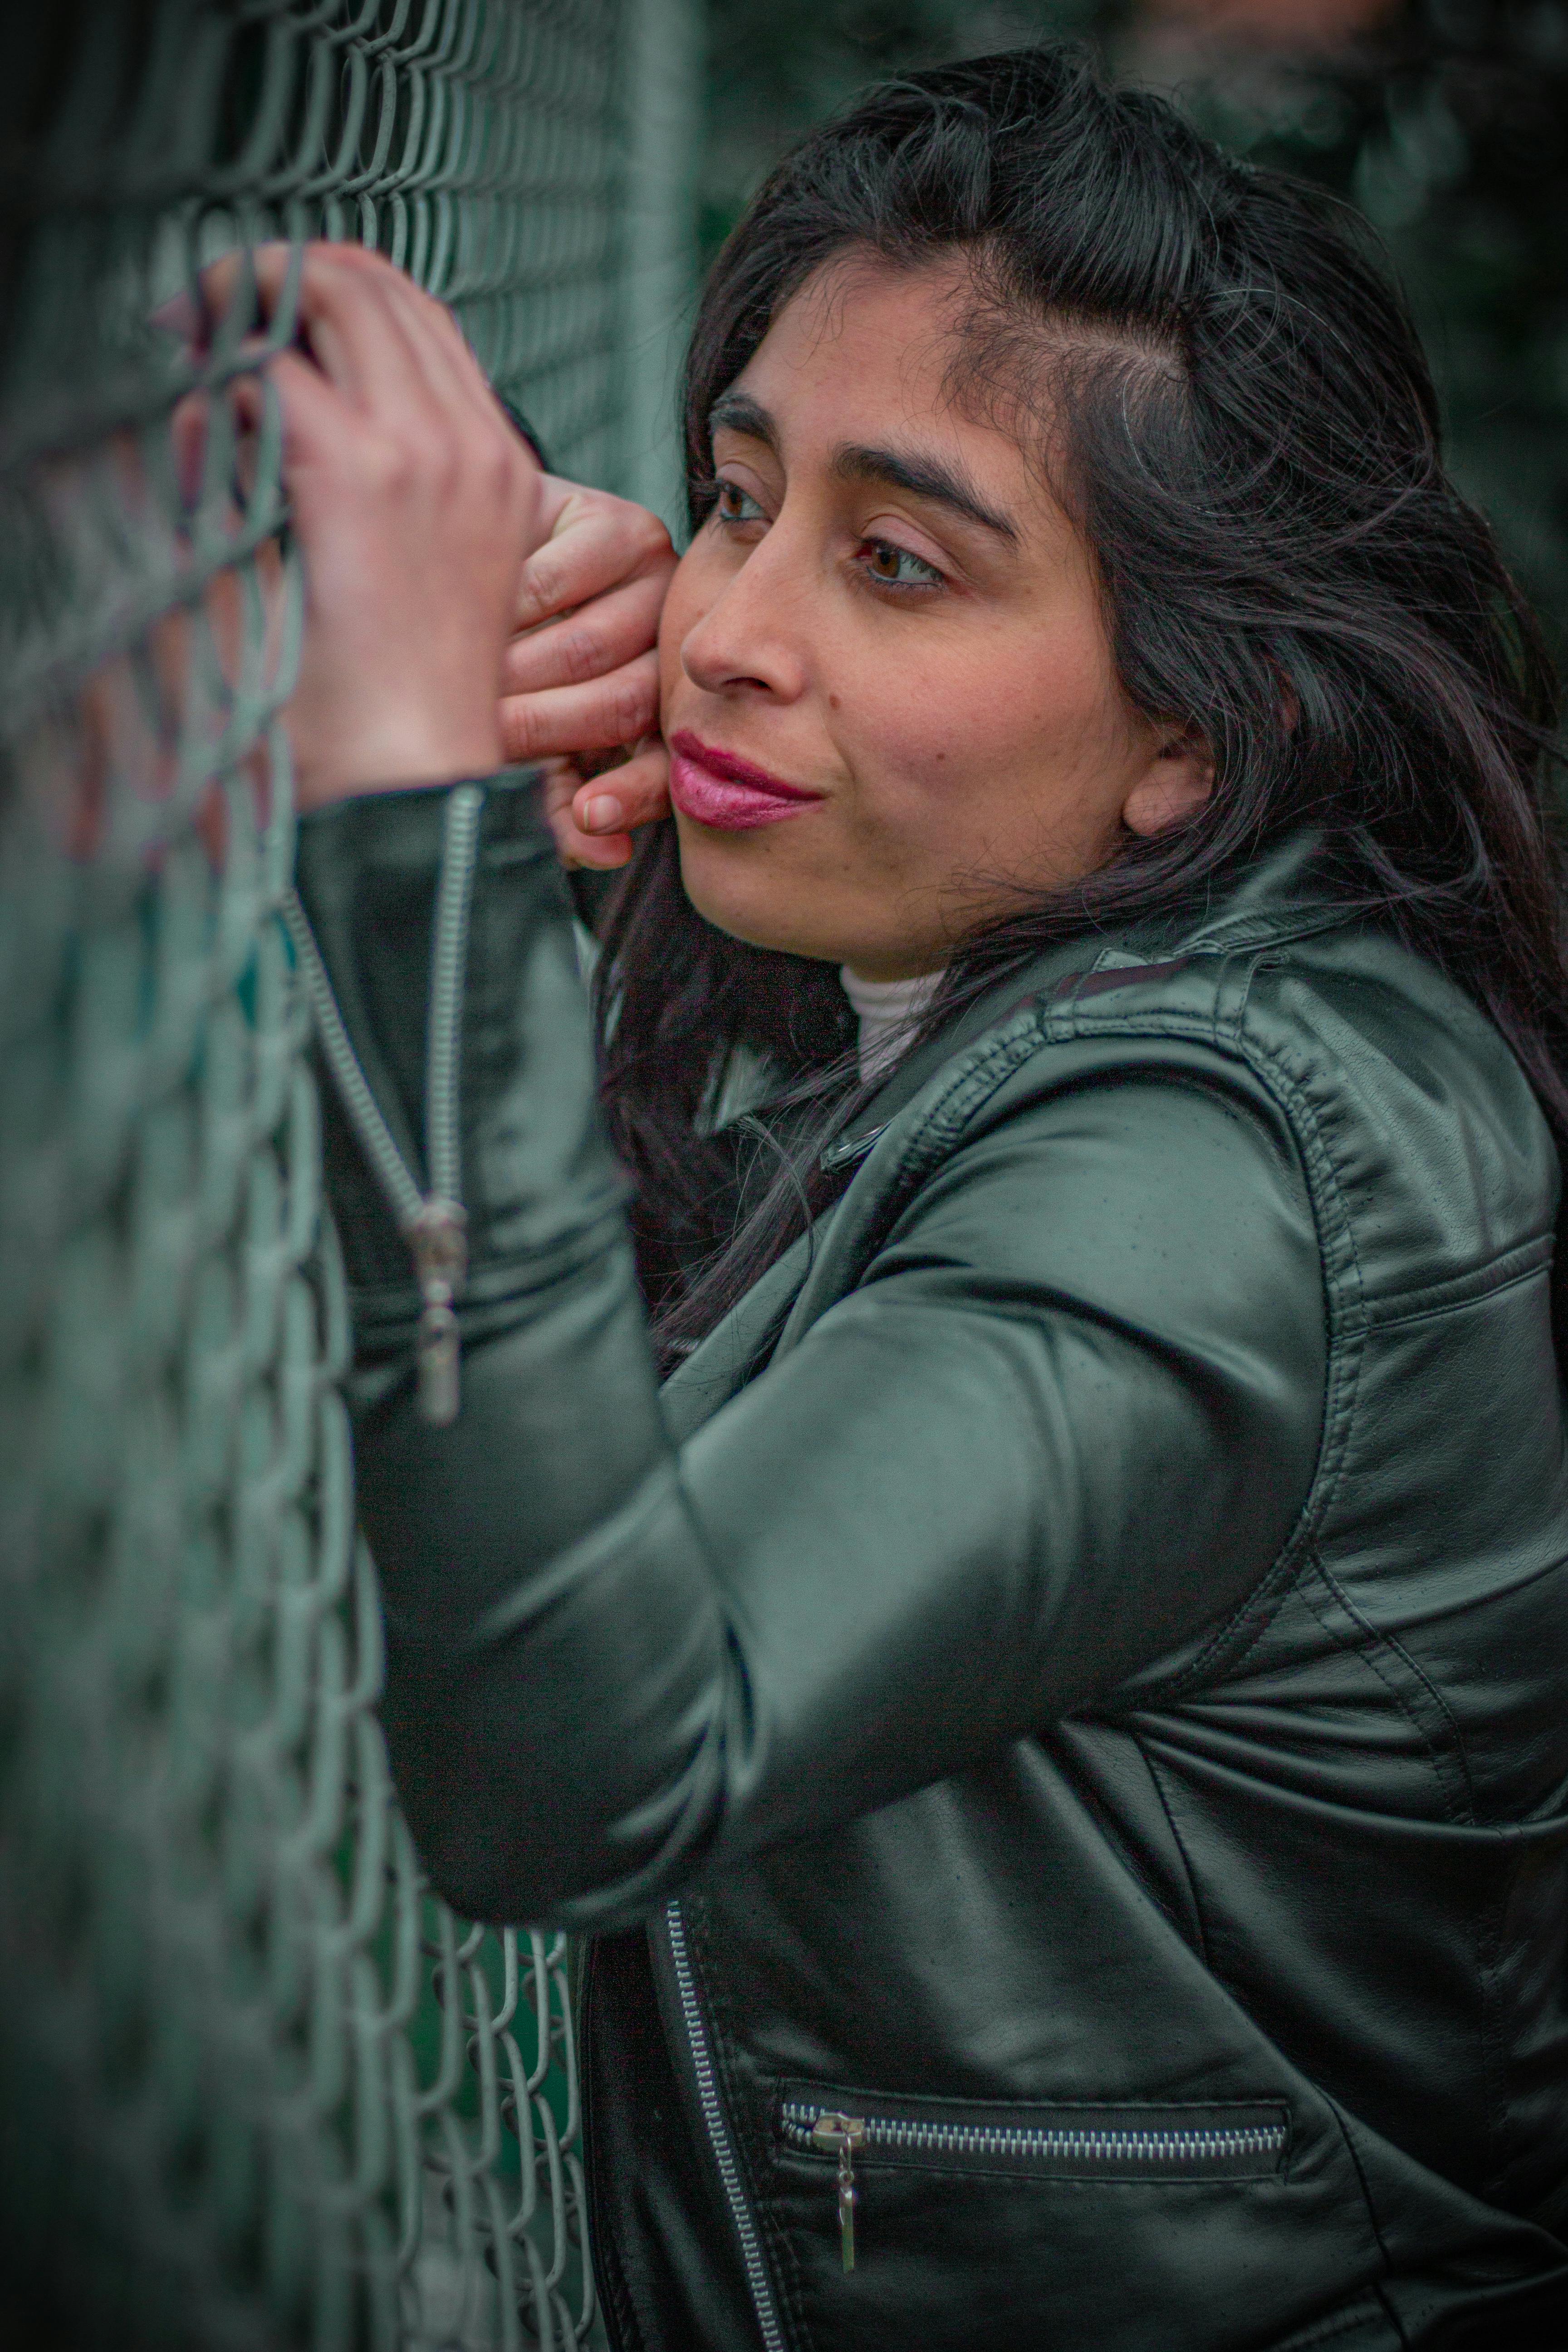 woman in a leather jacket posing on a chain link fence